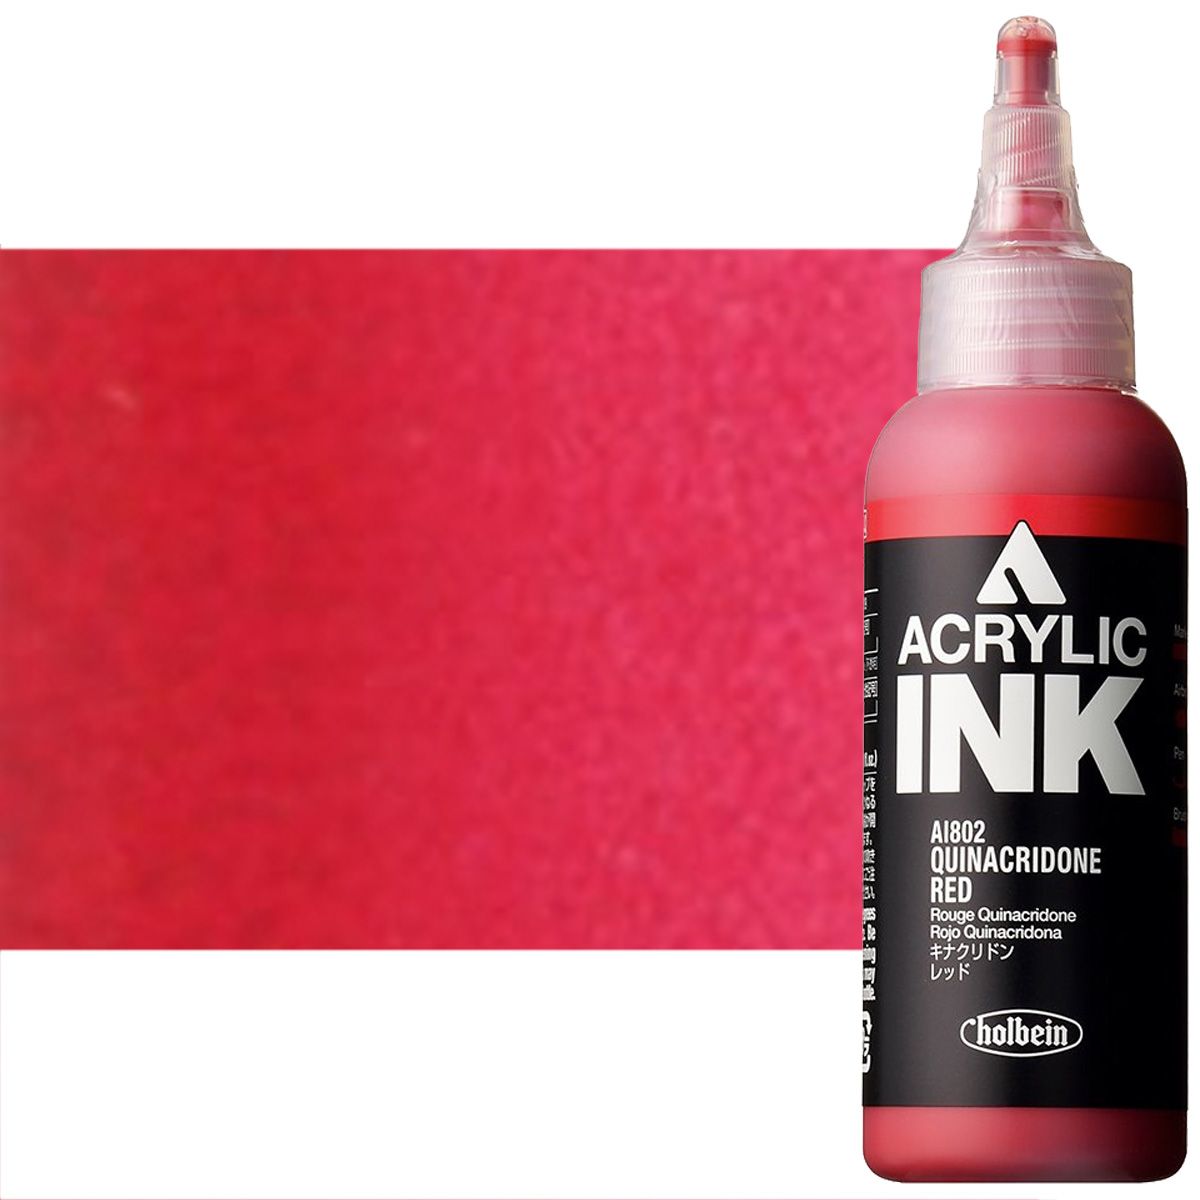 Holbein Acrylic Ink - Quinacridone Red, 100ml